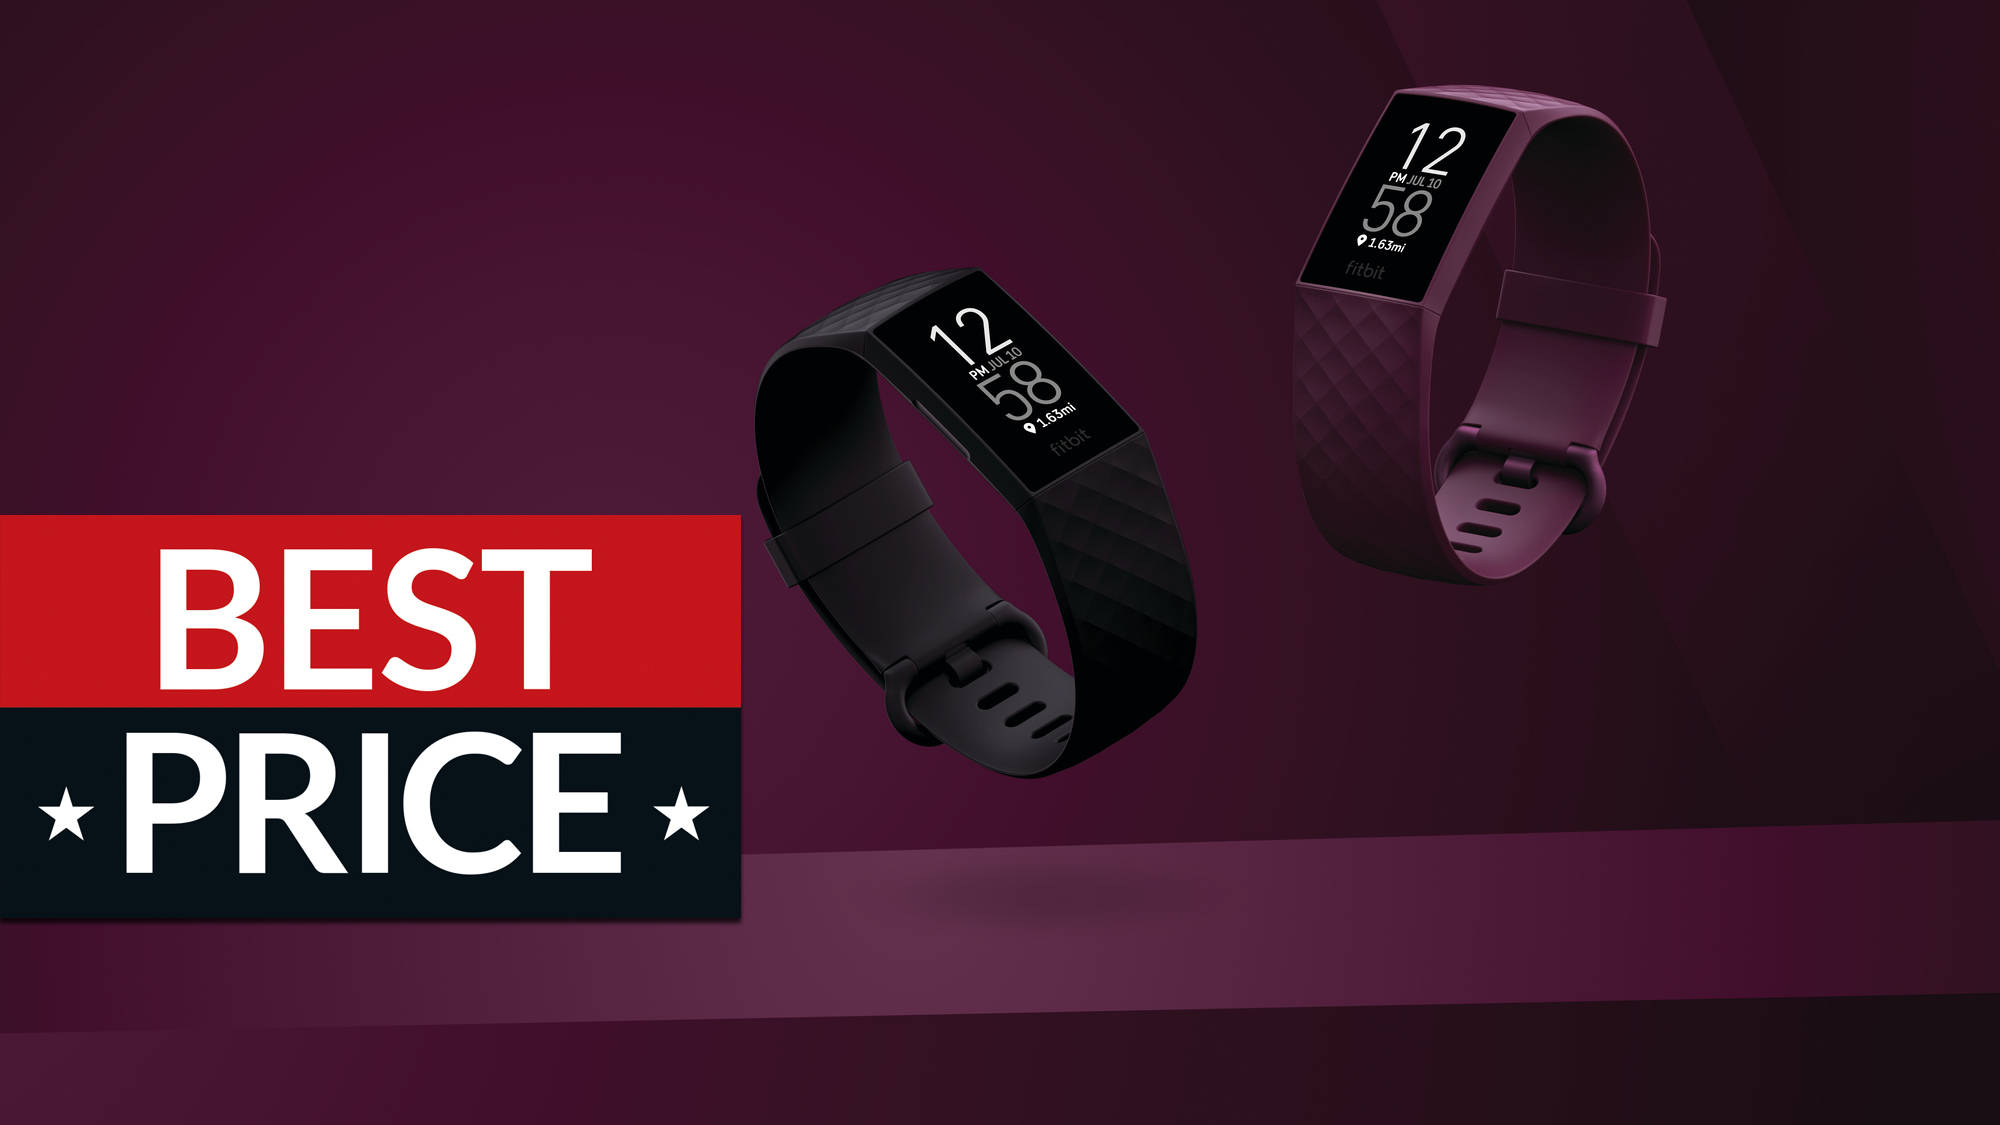 Best Fitbit Charge 3 And Charge 4 Deals September 2020 Stay Fit And Spend Less With These Fitbit Fitness Tracker Deals T3